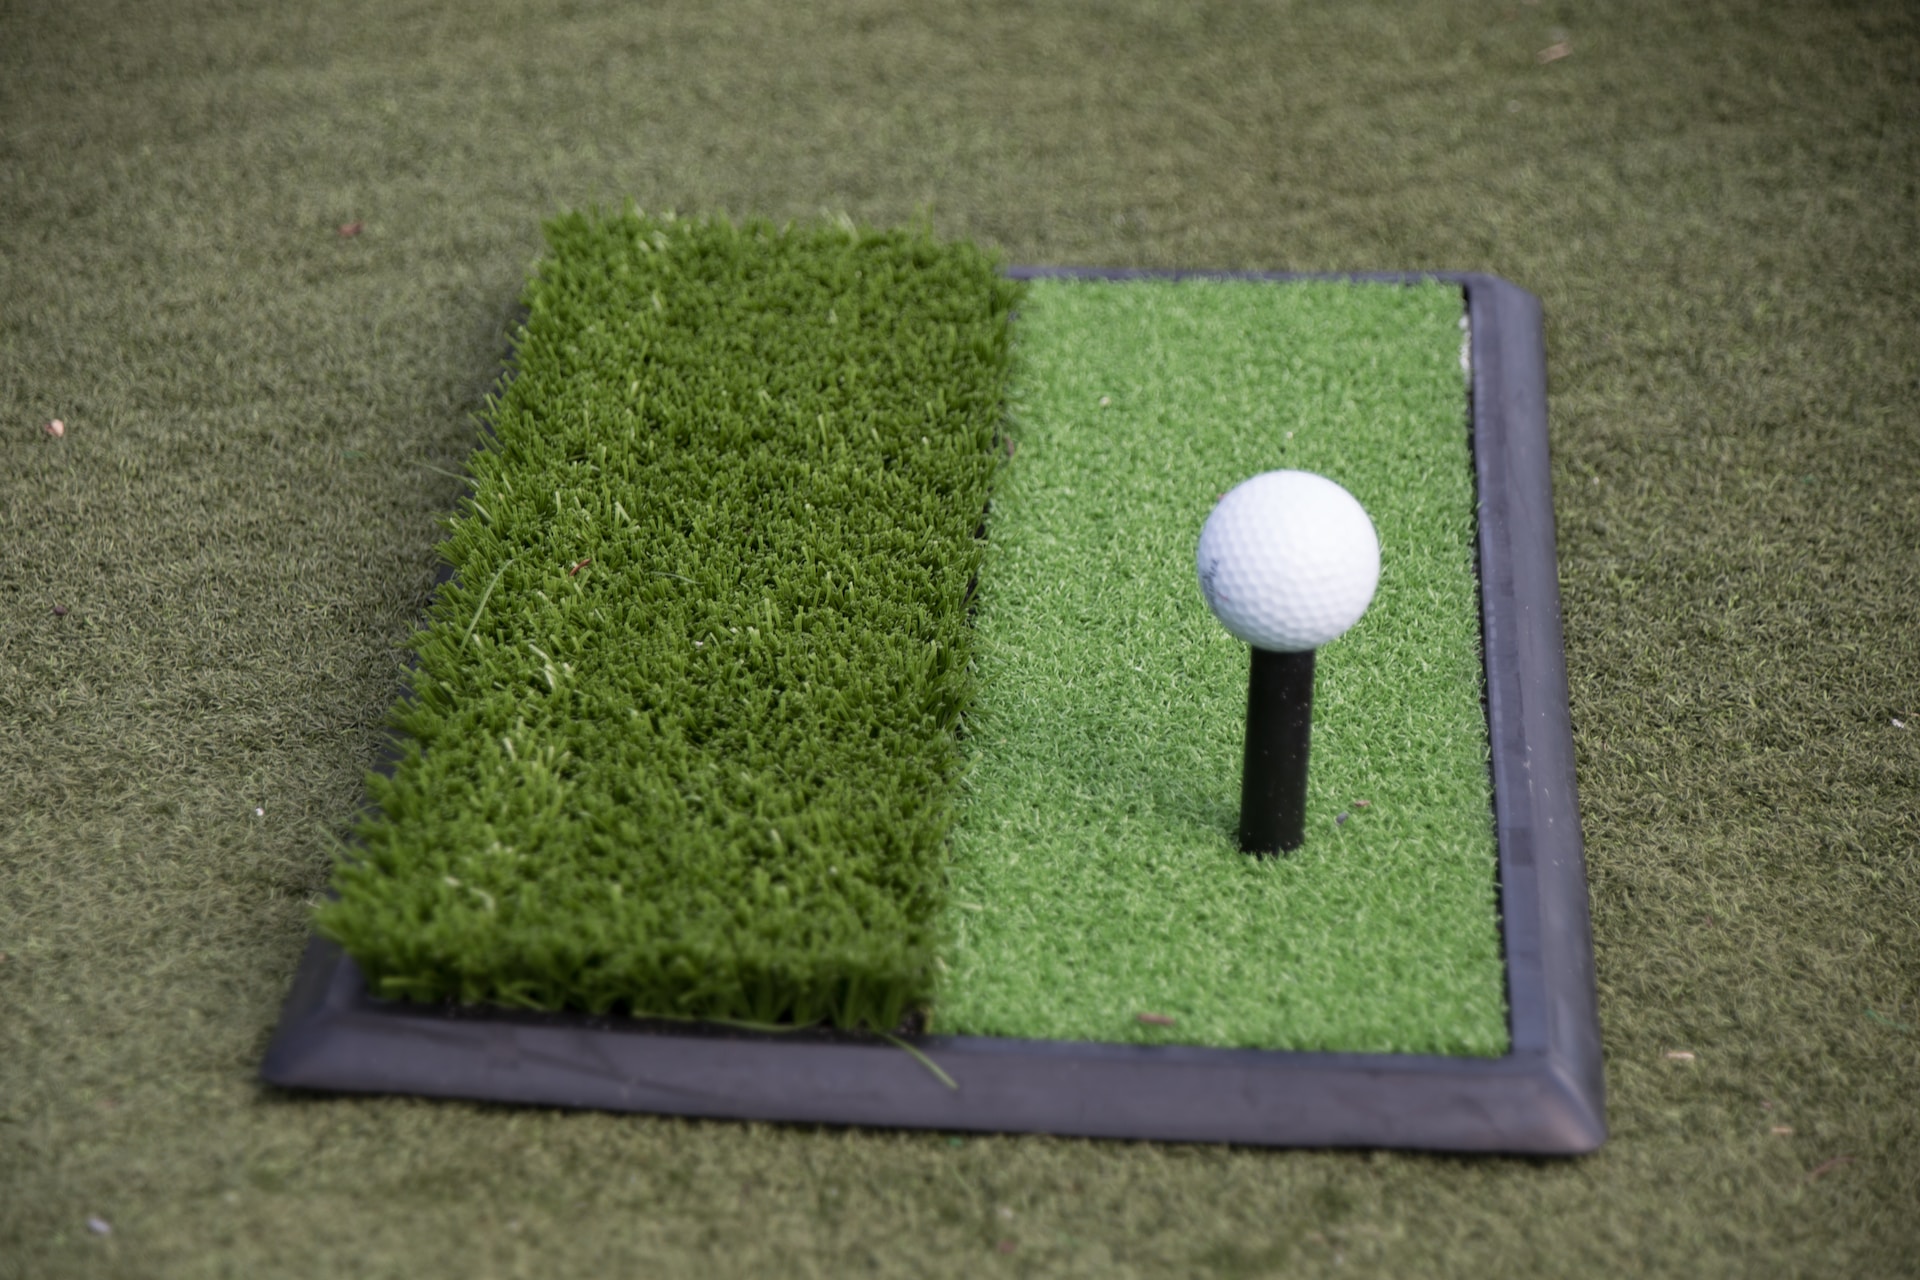 A golf ball and tee sitting on a square of artificial grass.